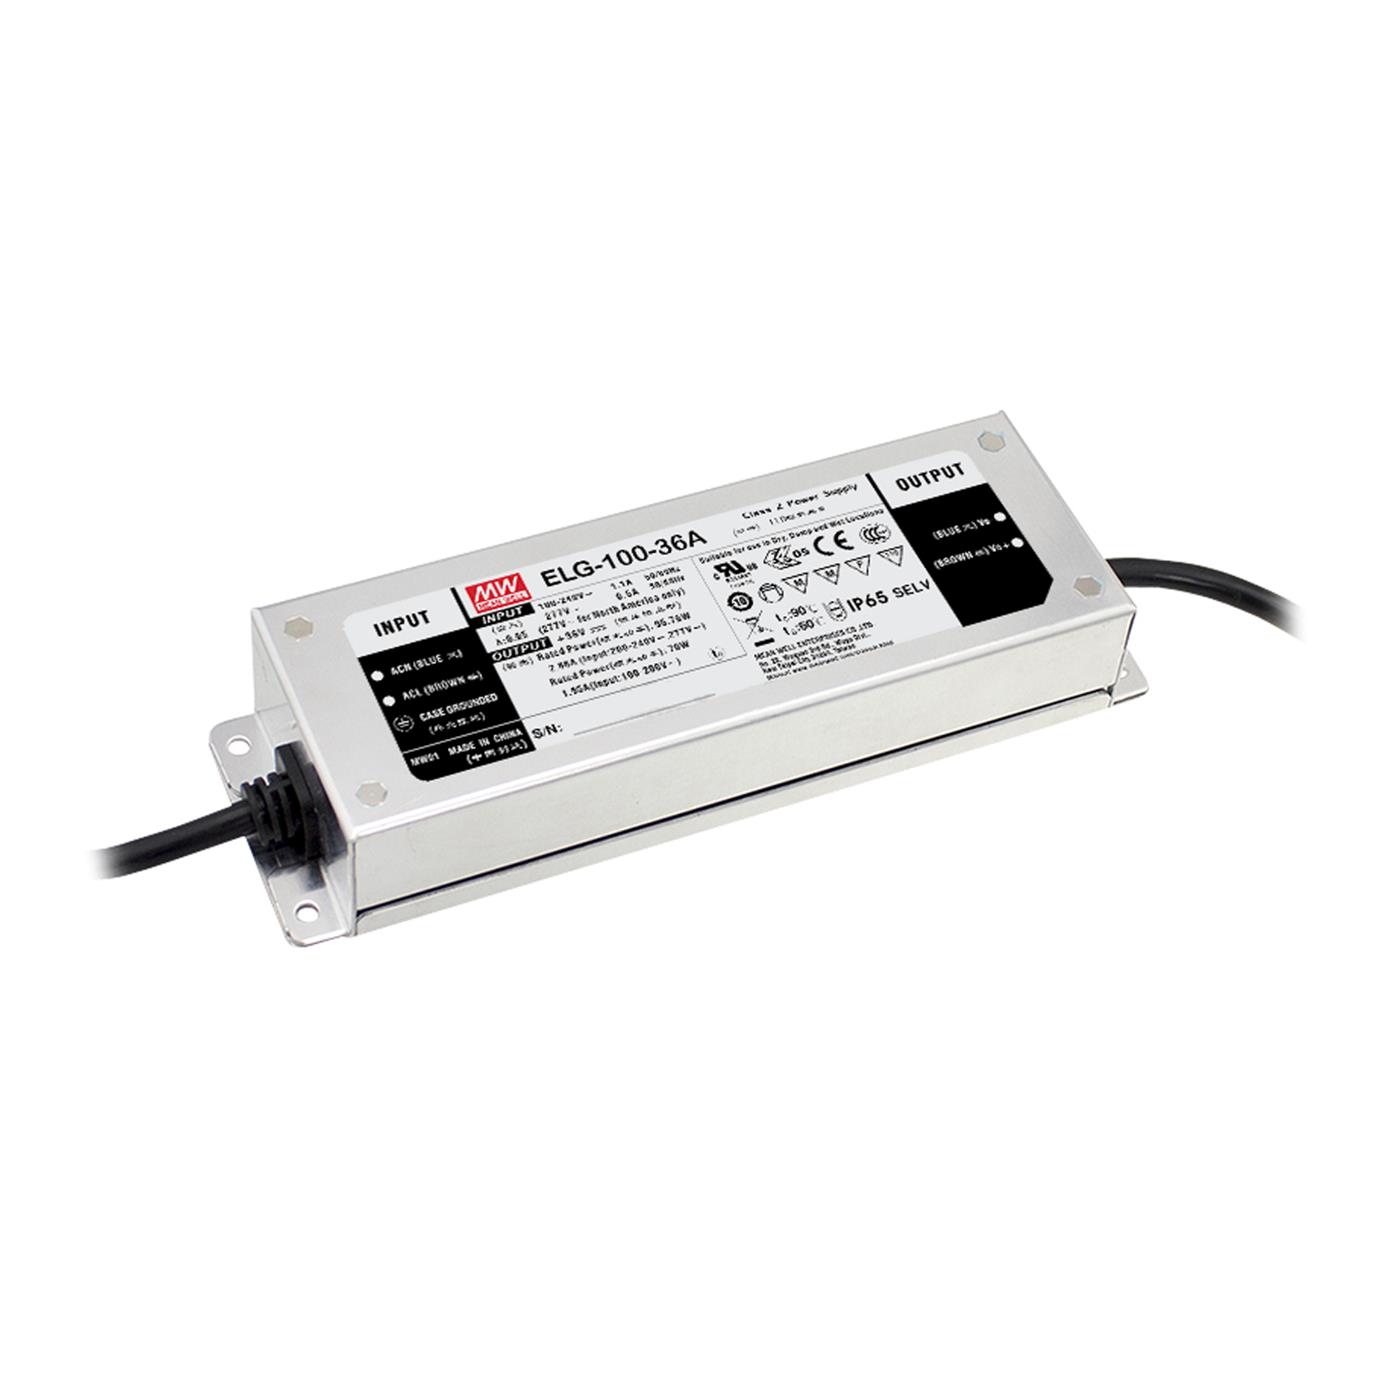 ELG-100-24A-3Y 96W 24V 4A LED power supply Transformer Driver IP65 Dimmable Potentiometer PWM